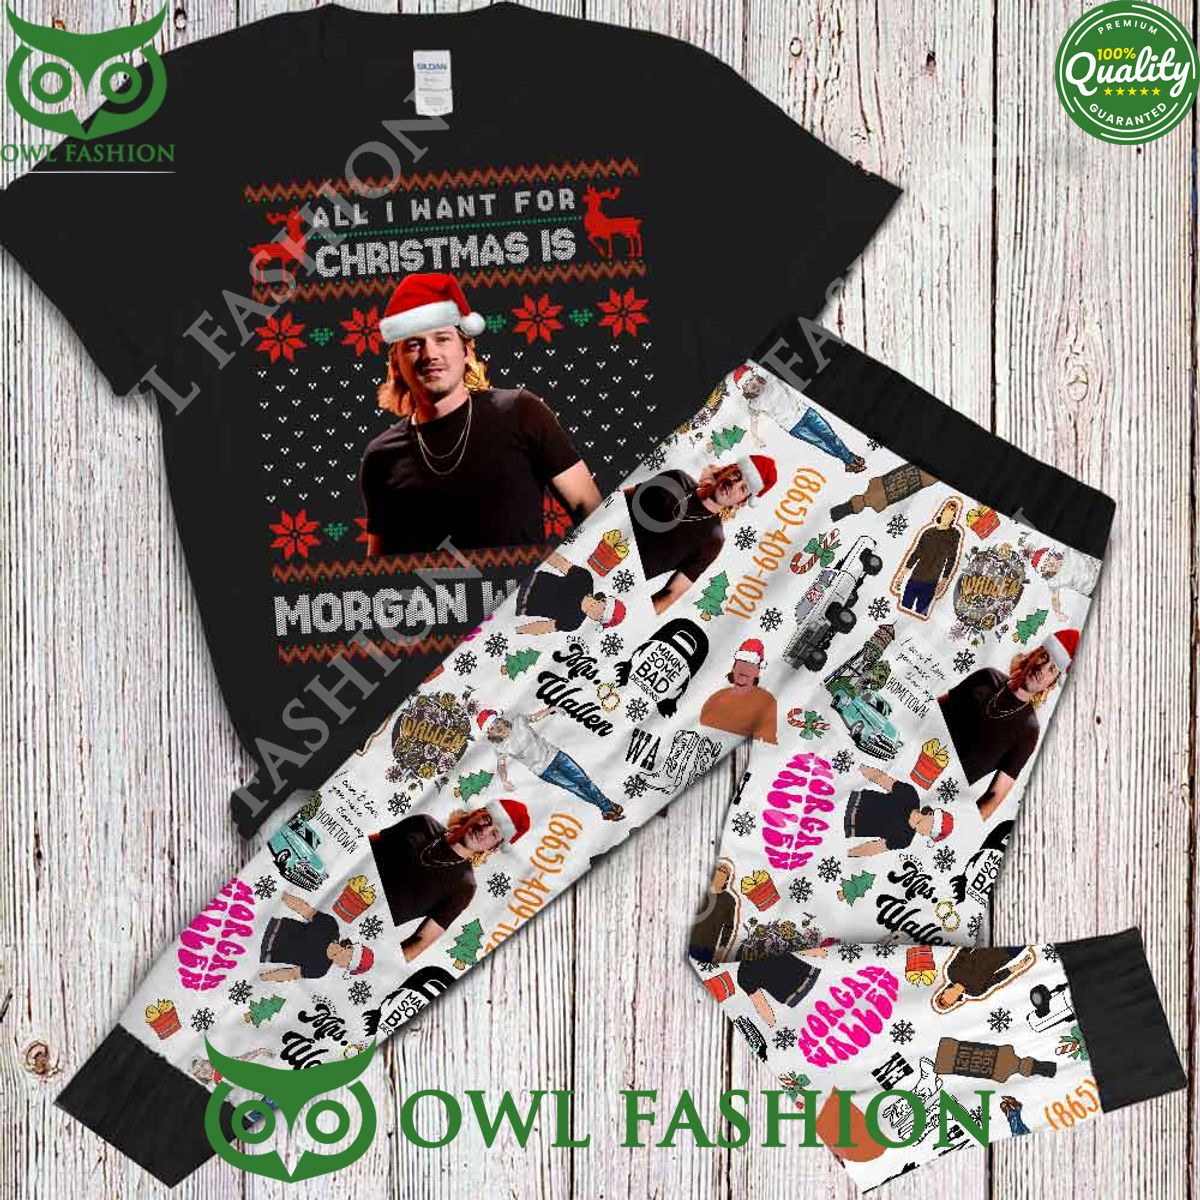 All I Want For Christmas is Morgan Wallen Best Music Pajamas Set